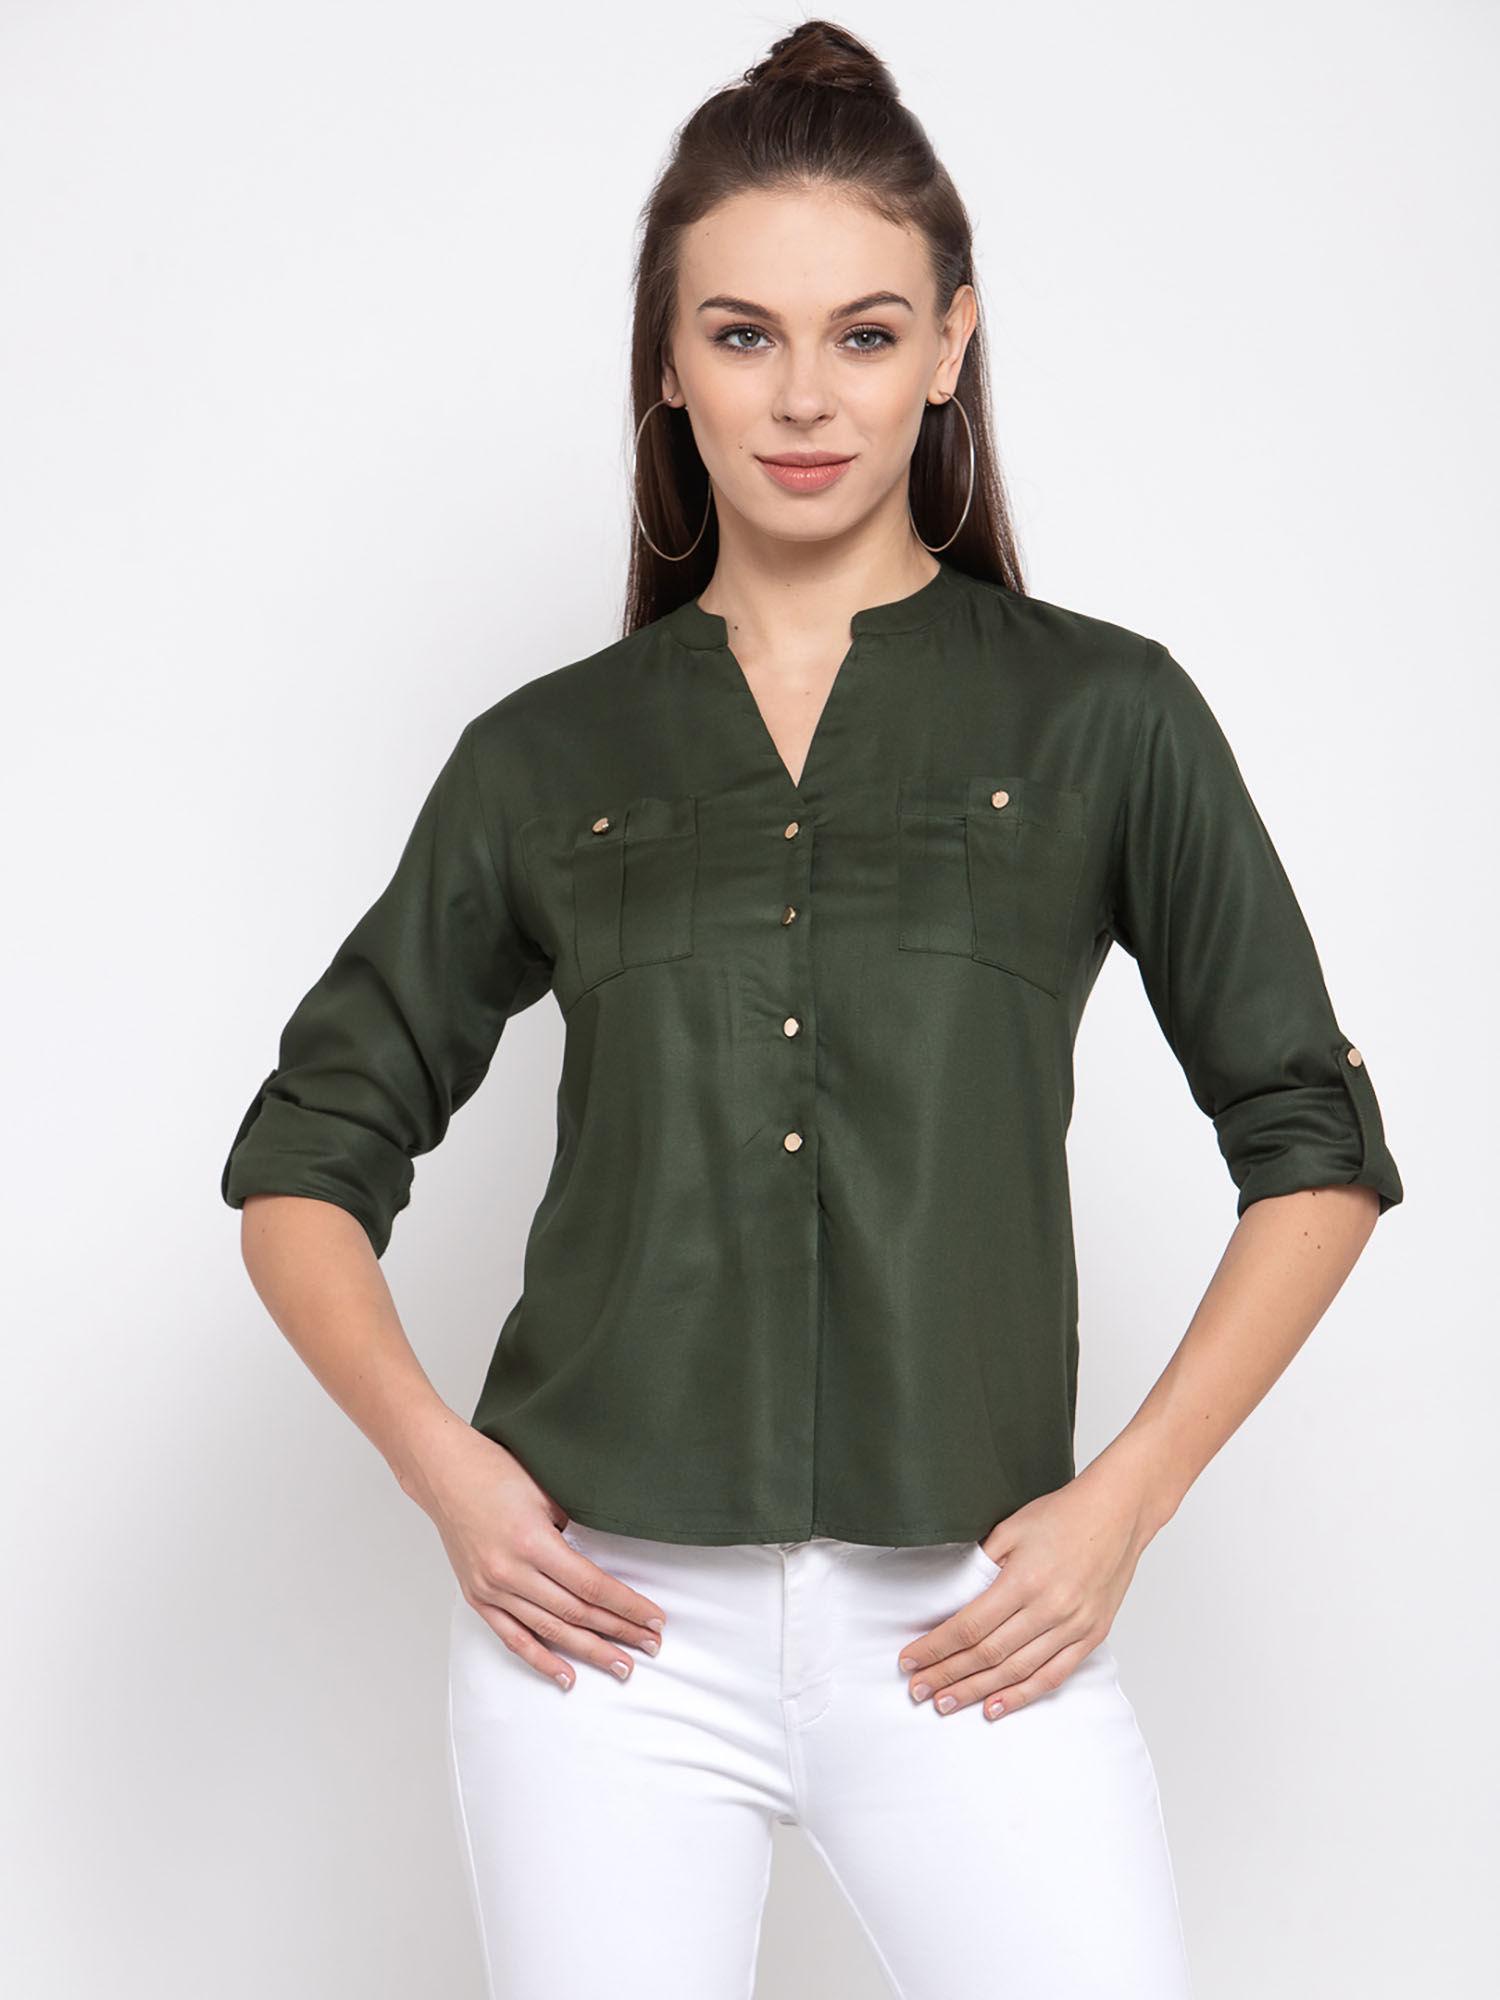 womens-olive-green-boxy-solid-casual-shirt